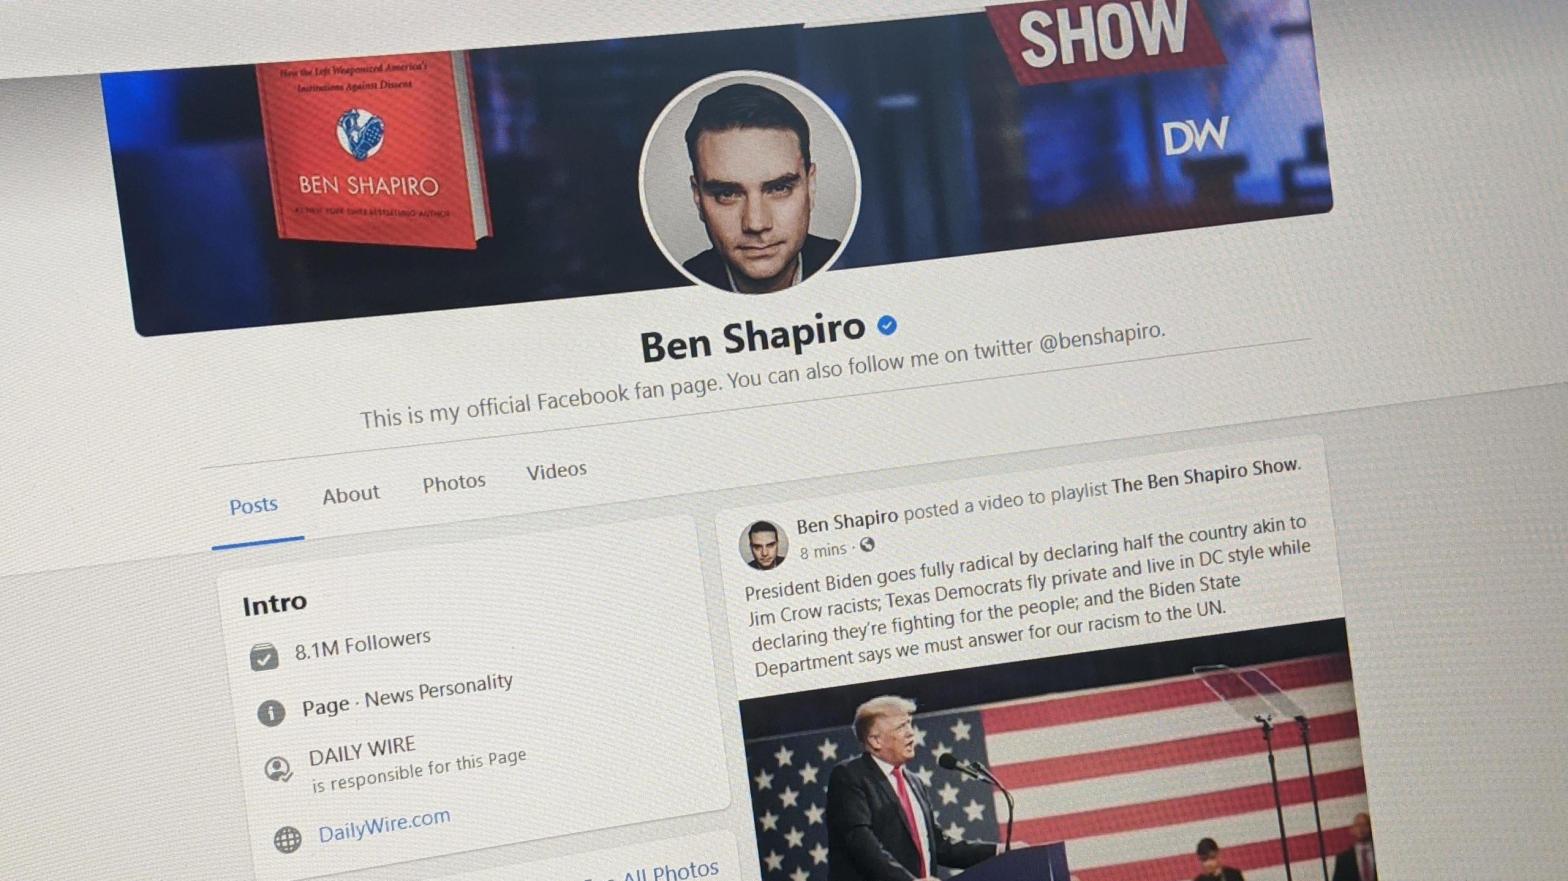 The Facebook page of right-wing commentator Ben Shapiro as seen on a screen in Washington, DC on July 14, 2021. (Photo: Tom McKay / Gizmodo)